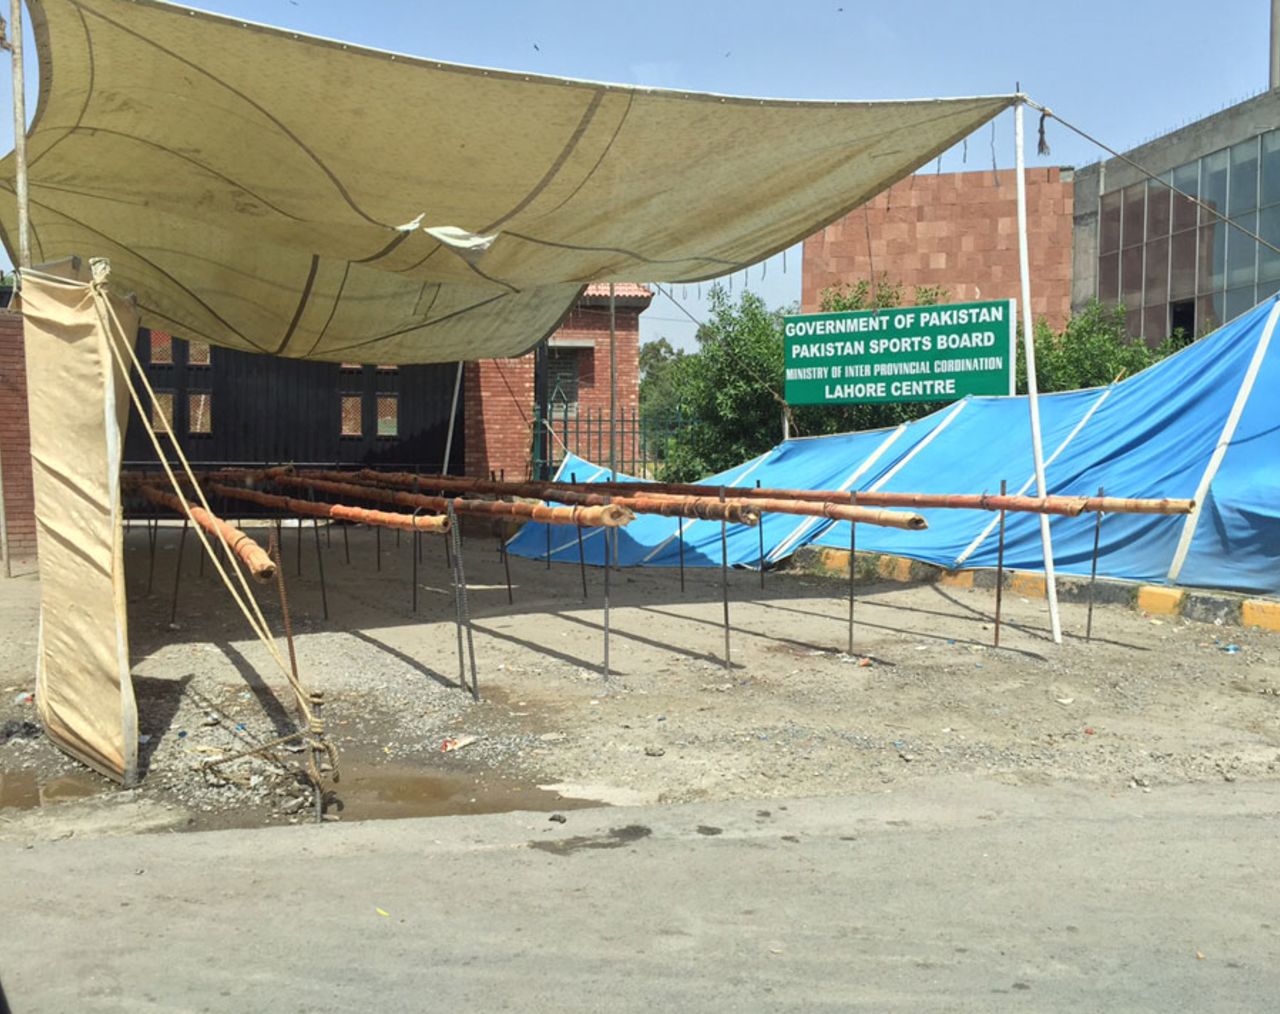 The site of the blast near Gaddafi Stadium a day later, Lahore, May 30, 2015